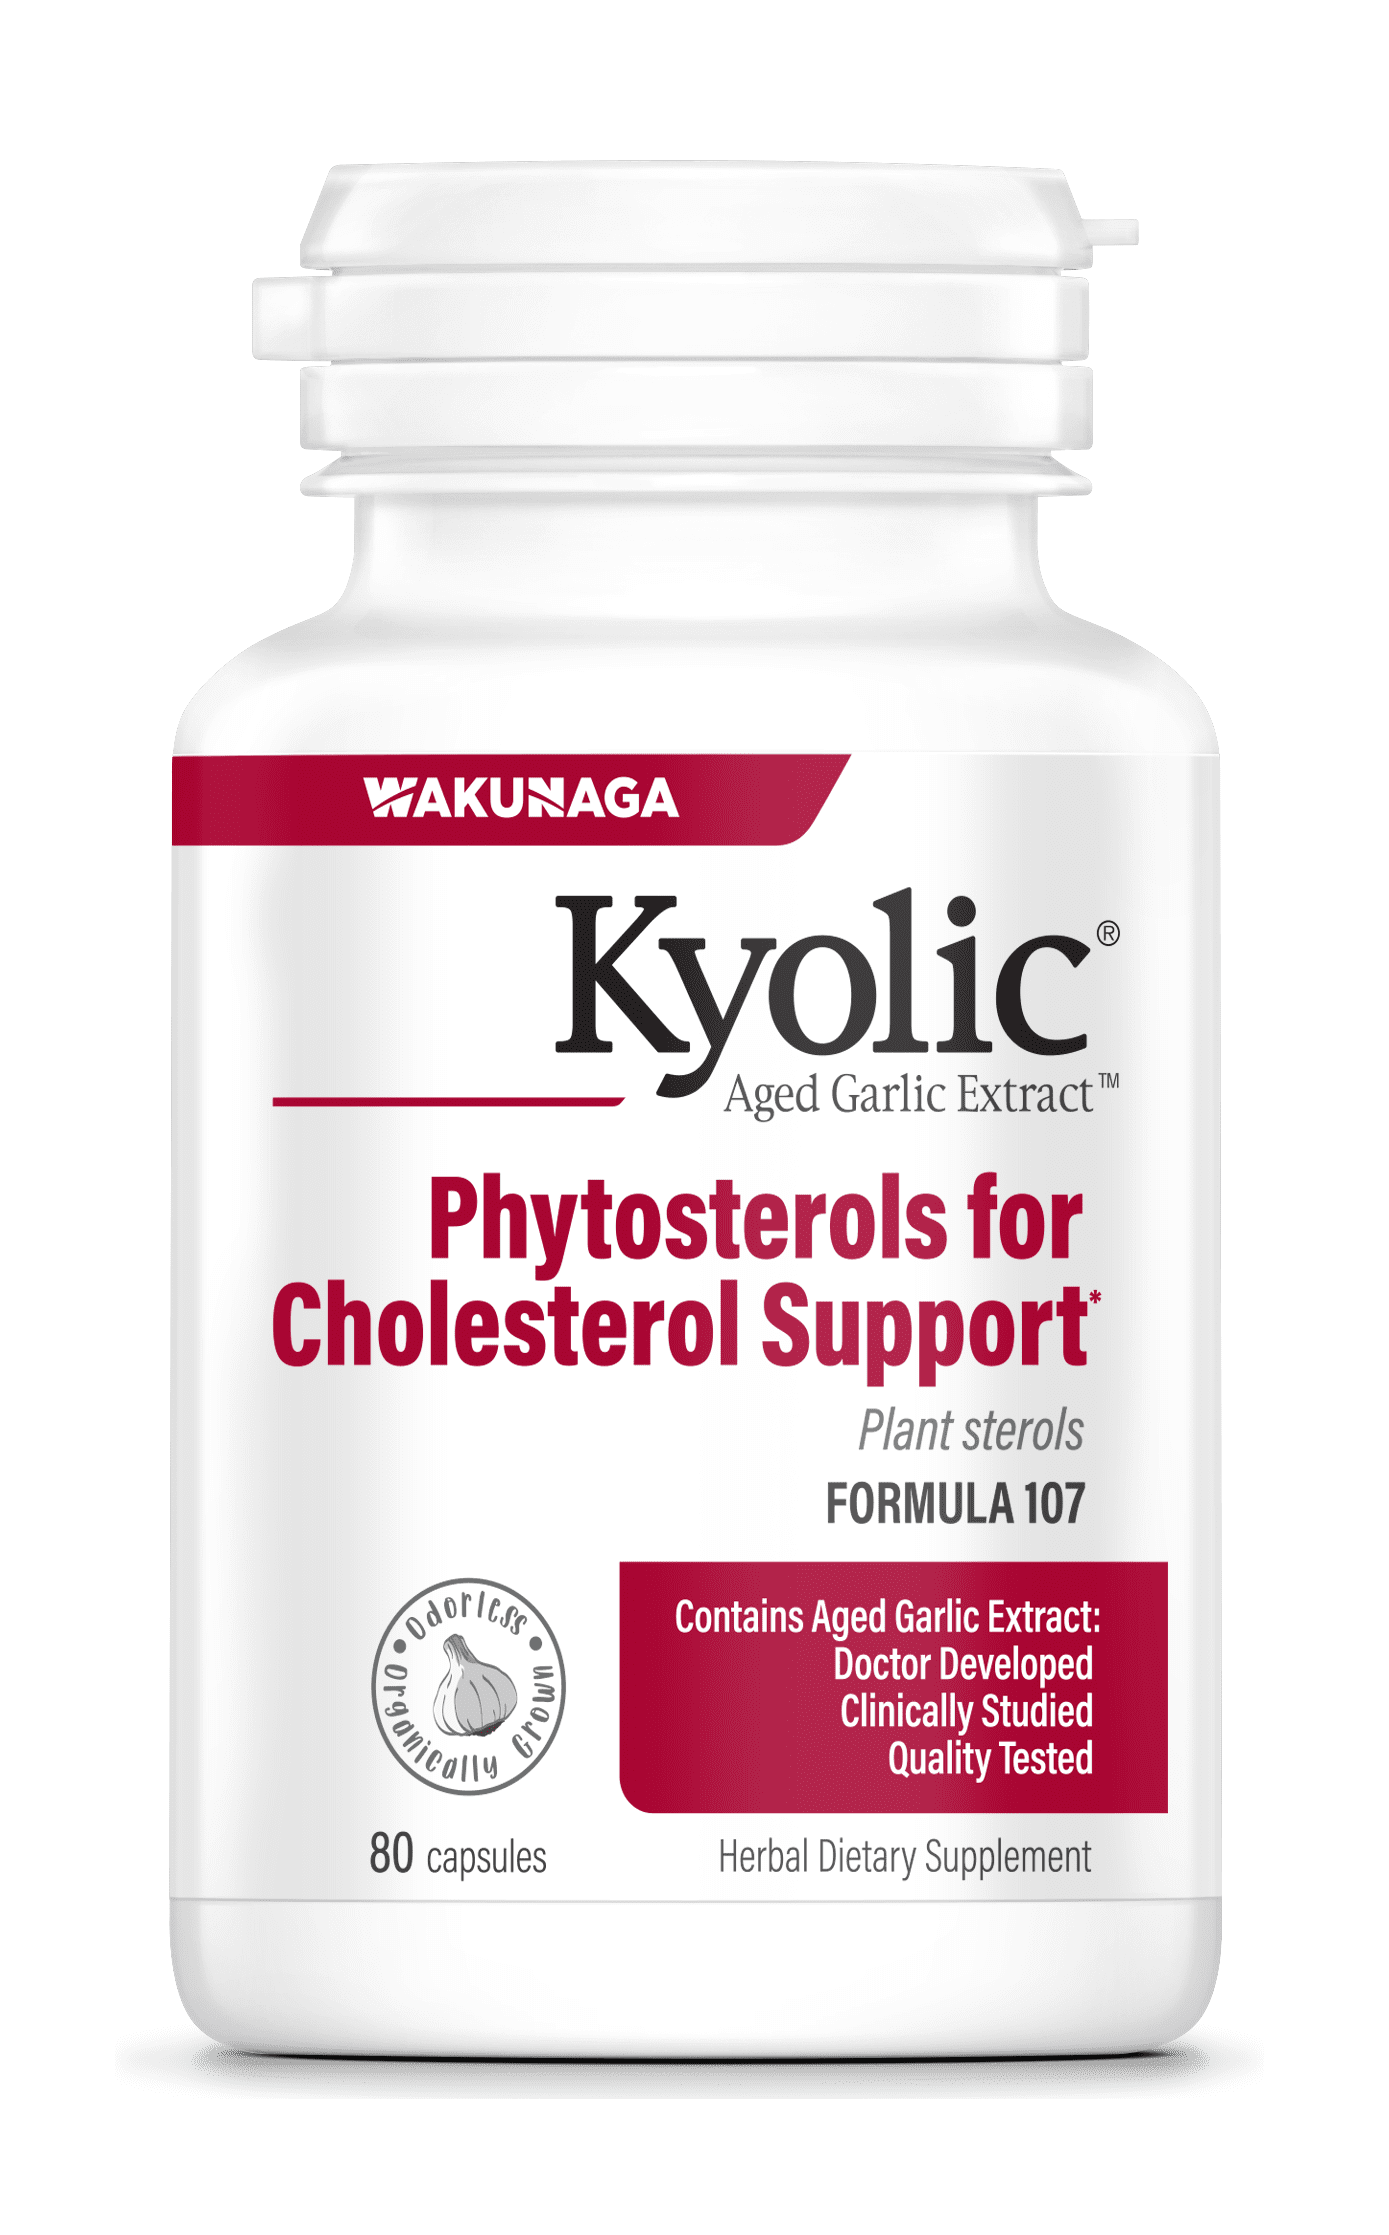 Kyolic® AGE Phytosterols for Cholesterol Support Formula 107